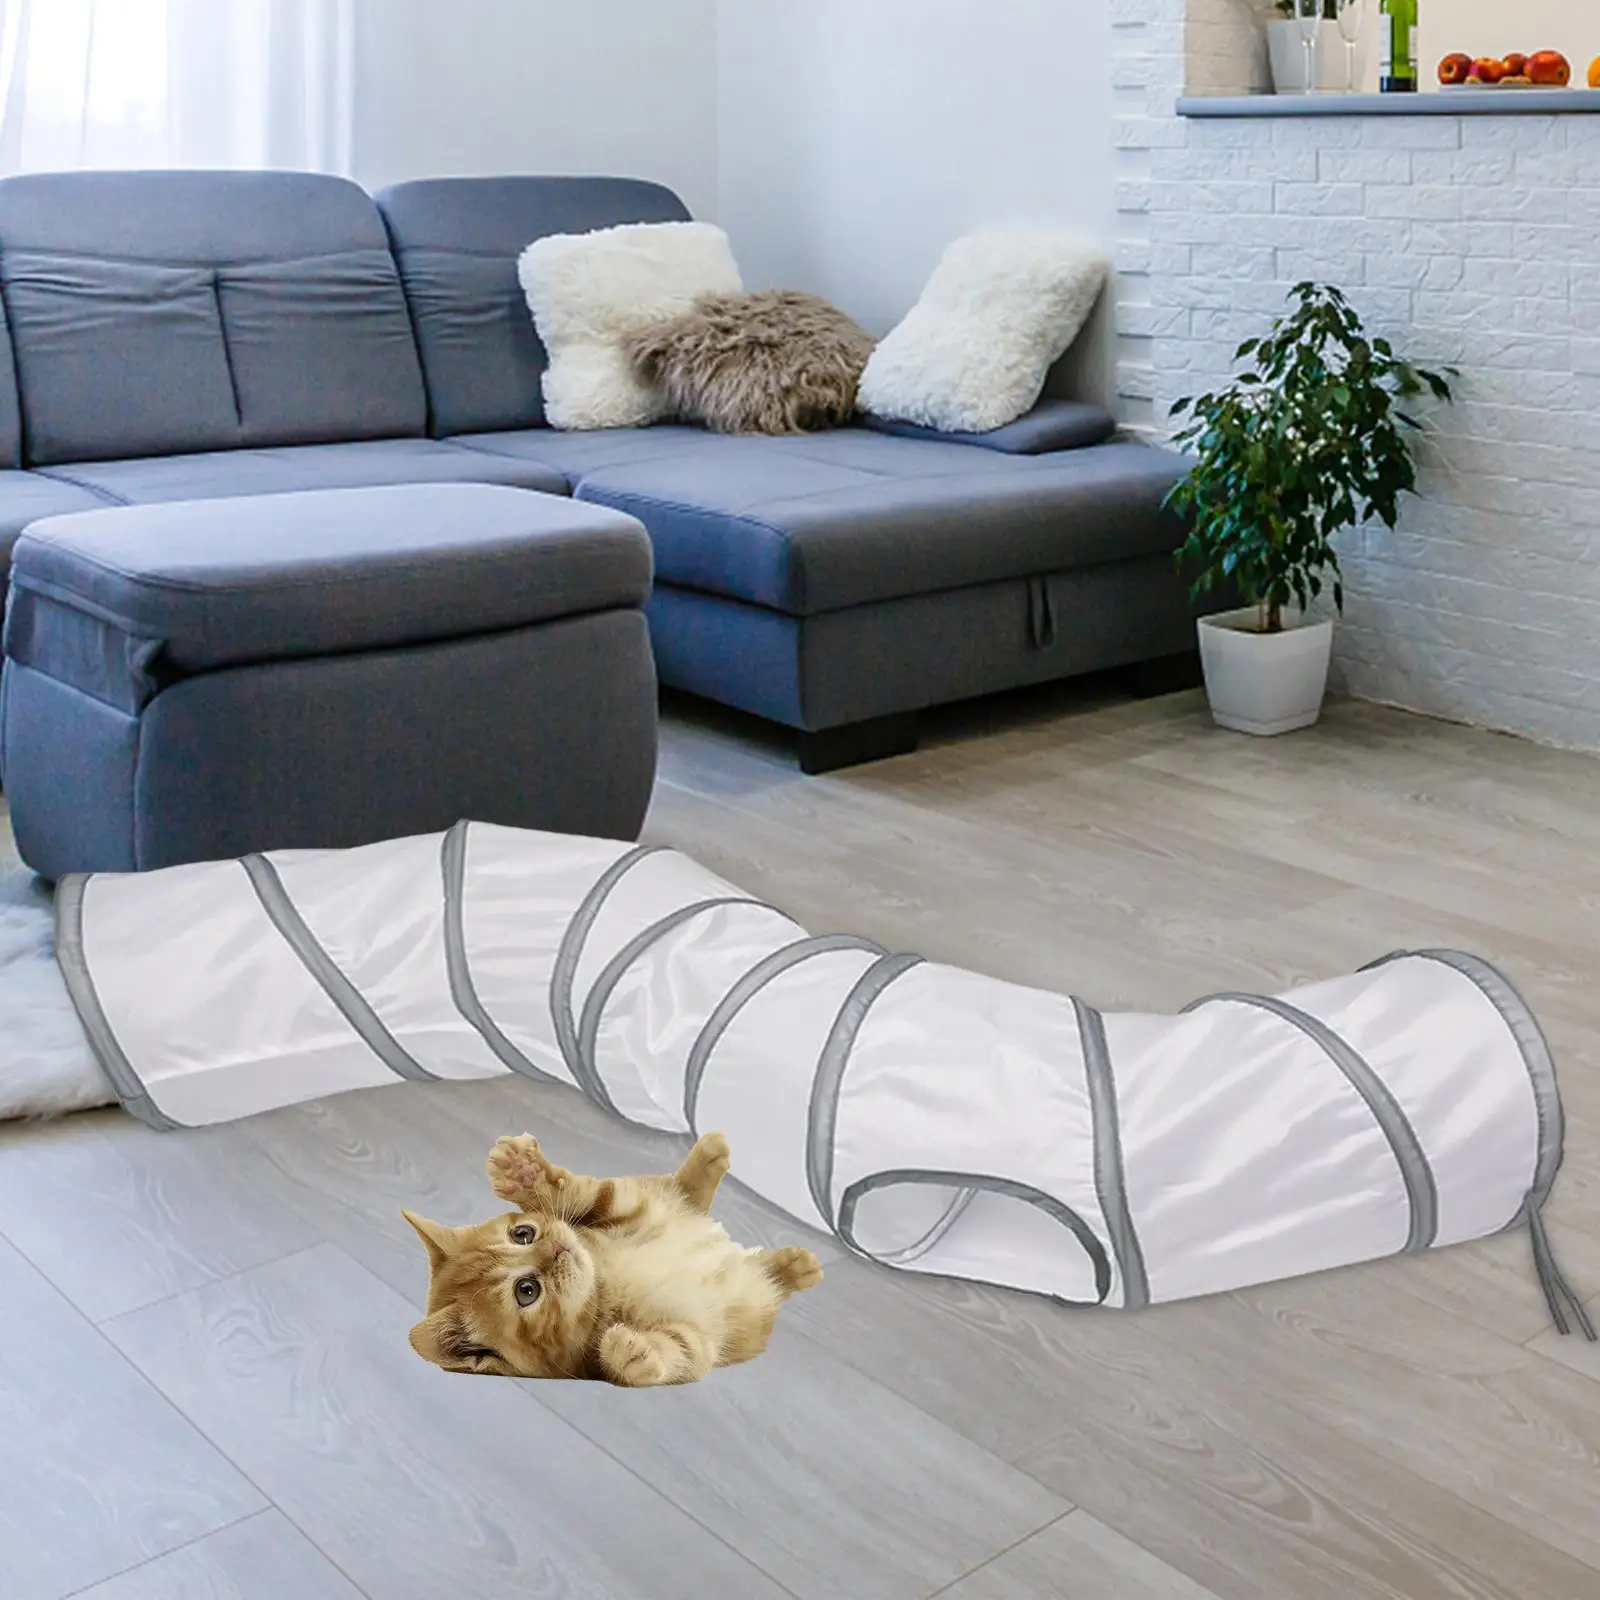 Foldable Cat Tunnel Tube House Portable Interactive Indoor Durable Pet Toys Tunnels for Bunny Kitten Training Exercising Hiding